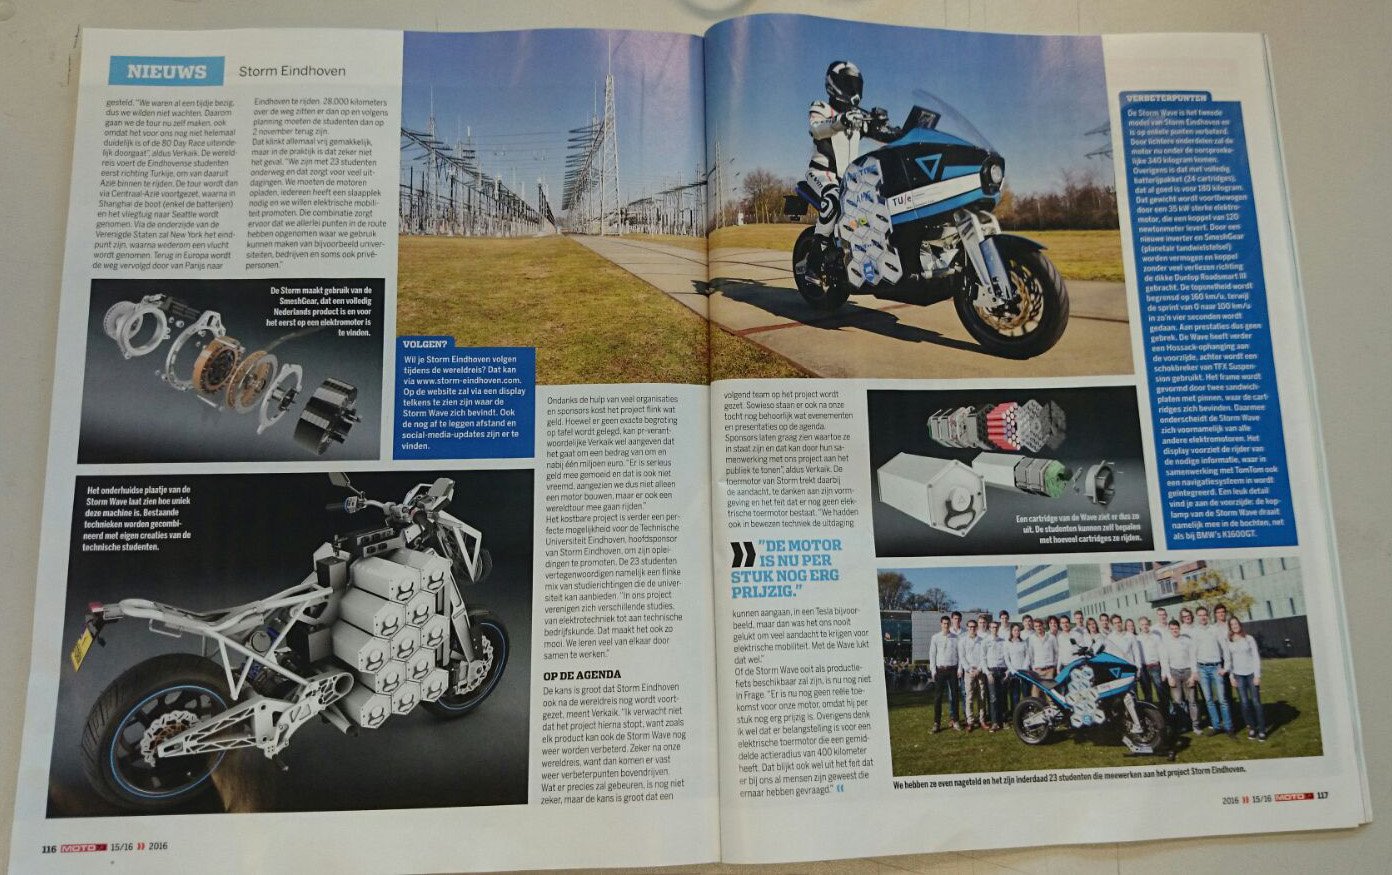 Observatorium afdrijven Goed SmeshGear on Twitter: "@SmeshGear was mentioned in an article of dutch  motor magazine MOTO73 #electricvehicle #gearbox #innovation  https://t.co/RQod9AluXZ" / Twitter